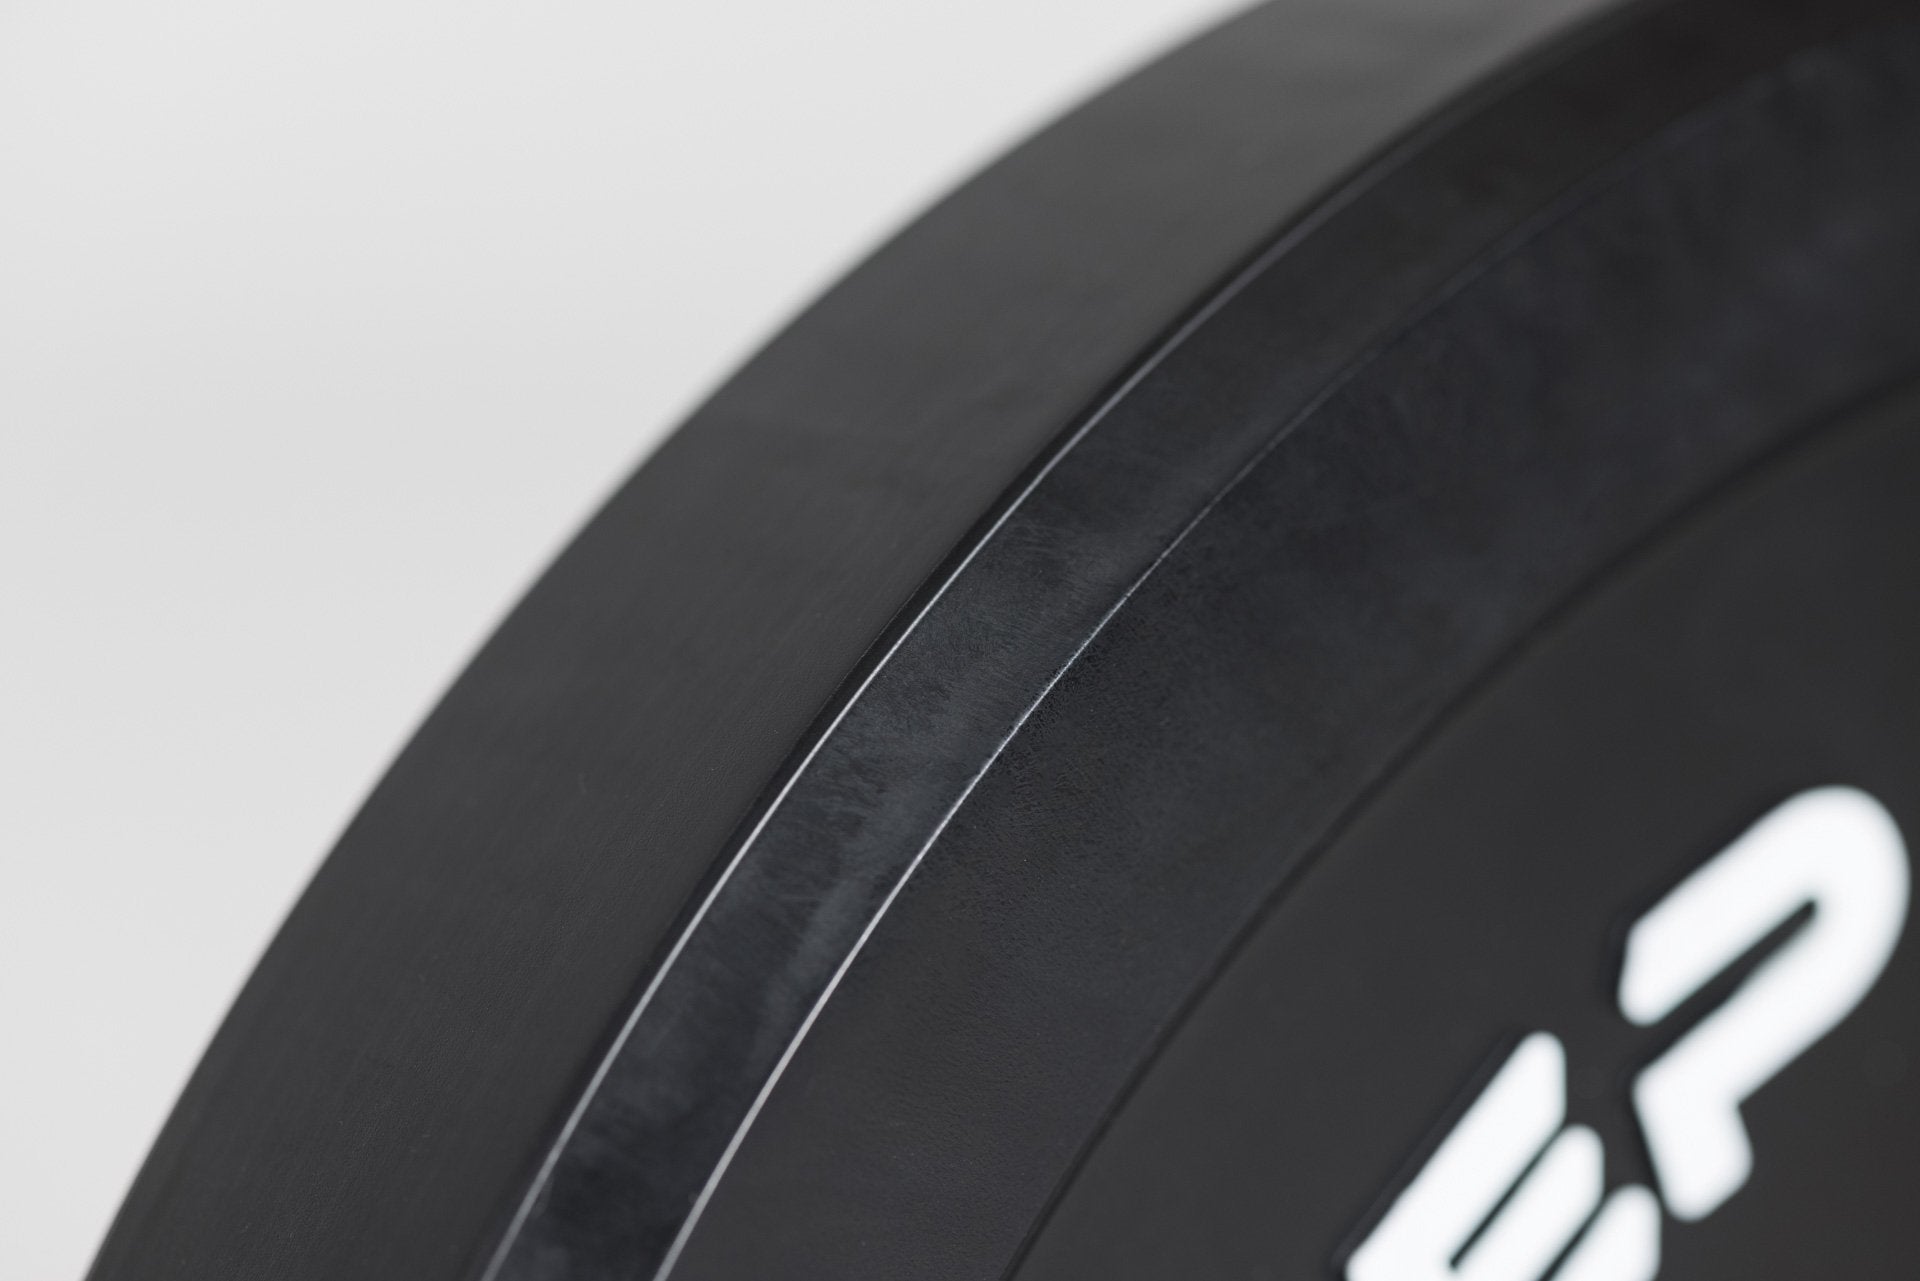 Close-up view of beveled edge feature which makes REP's Black Bumper Plates easier to pick up off the floor.